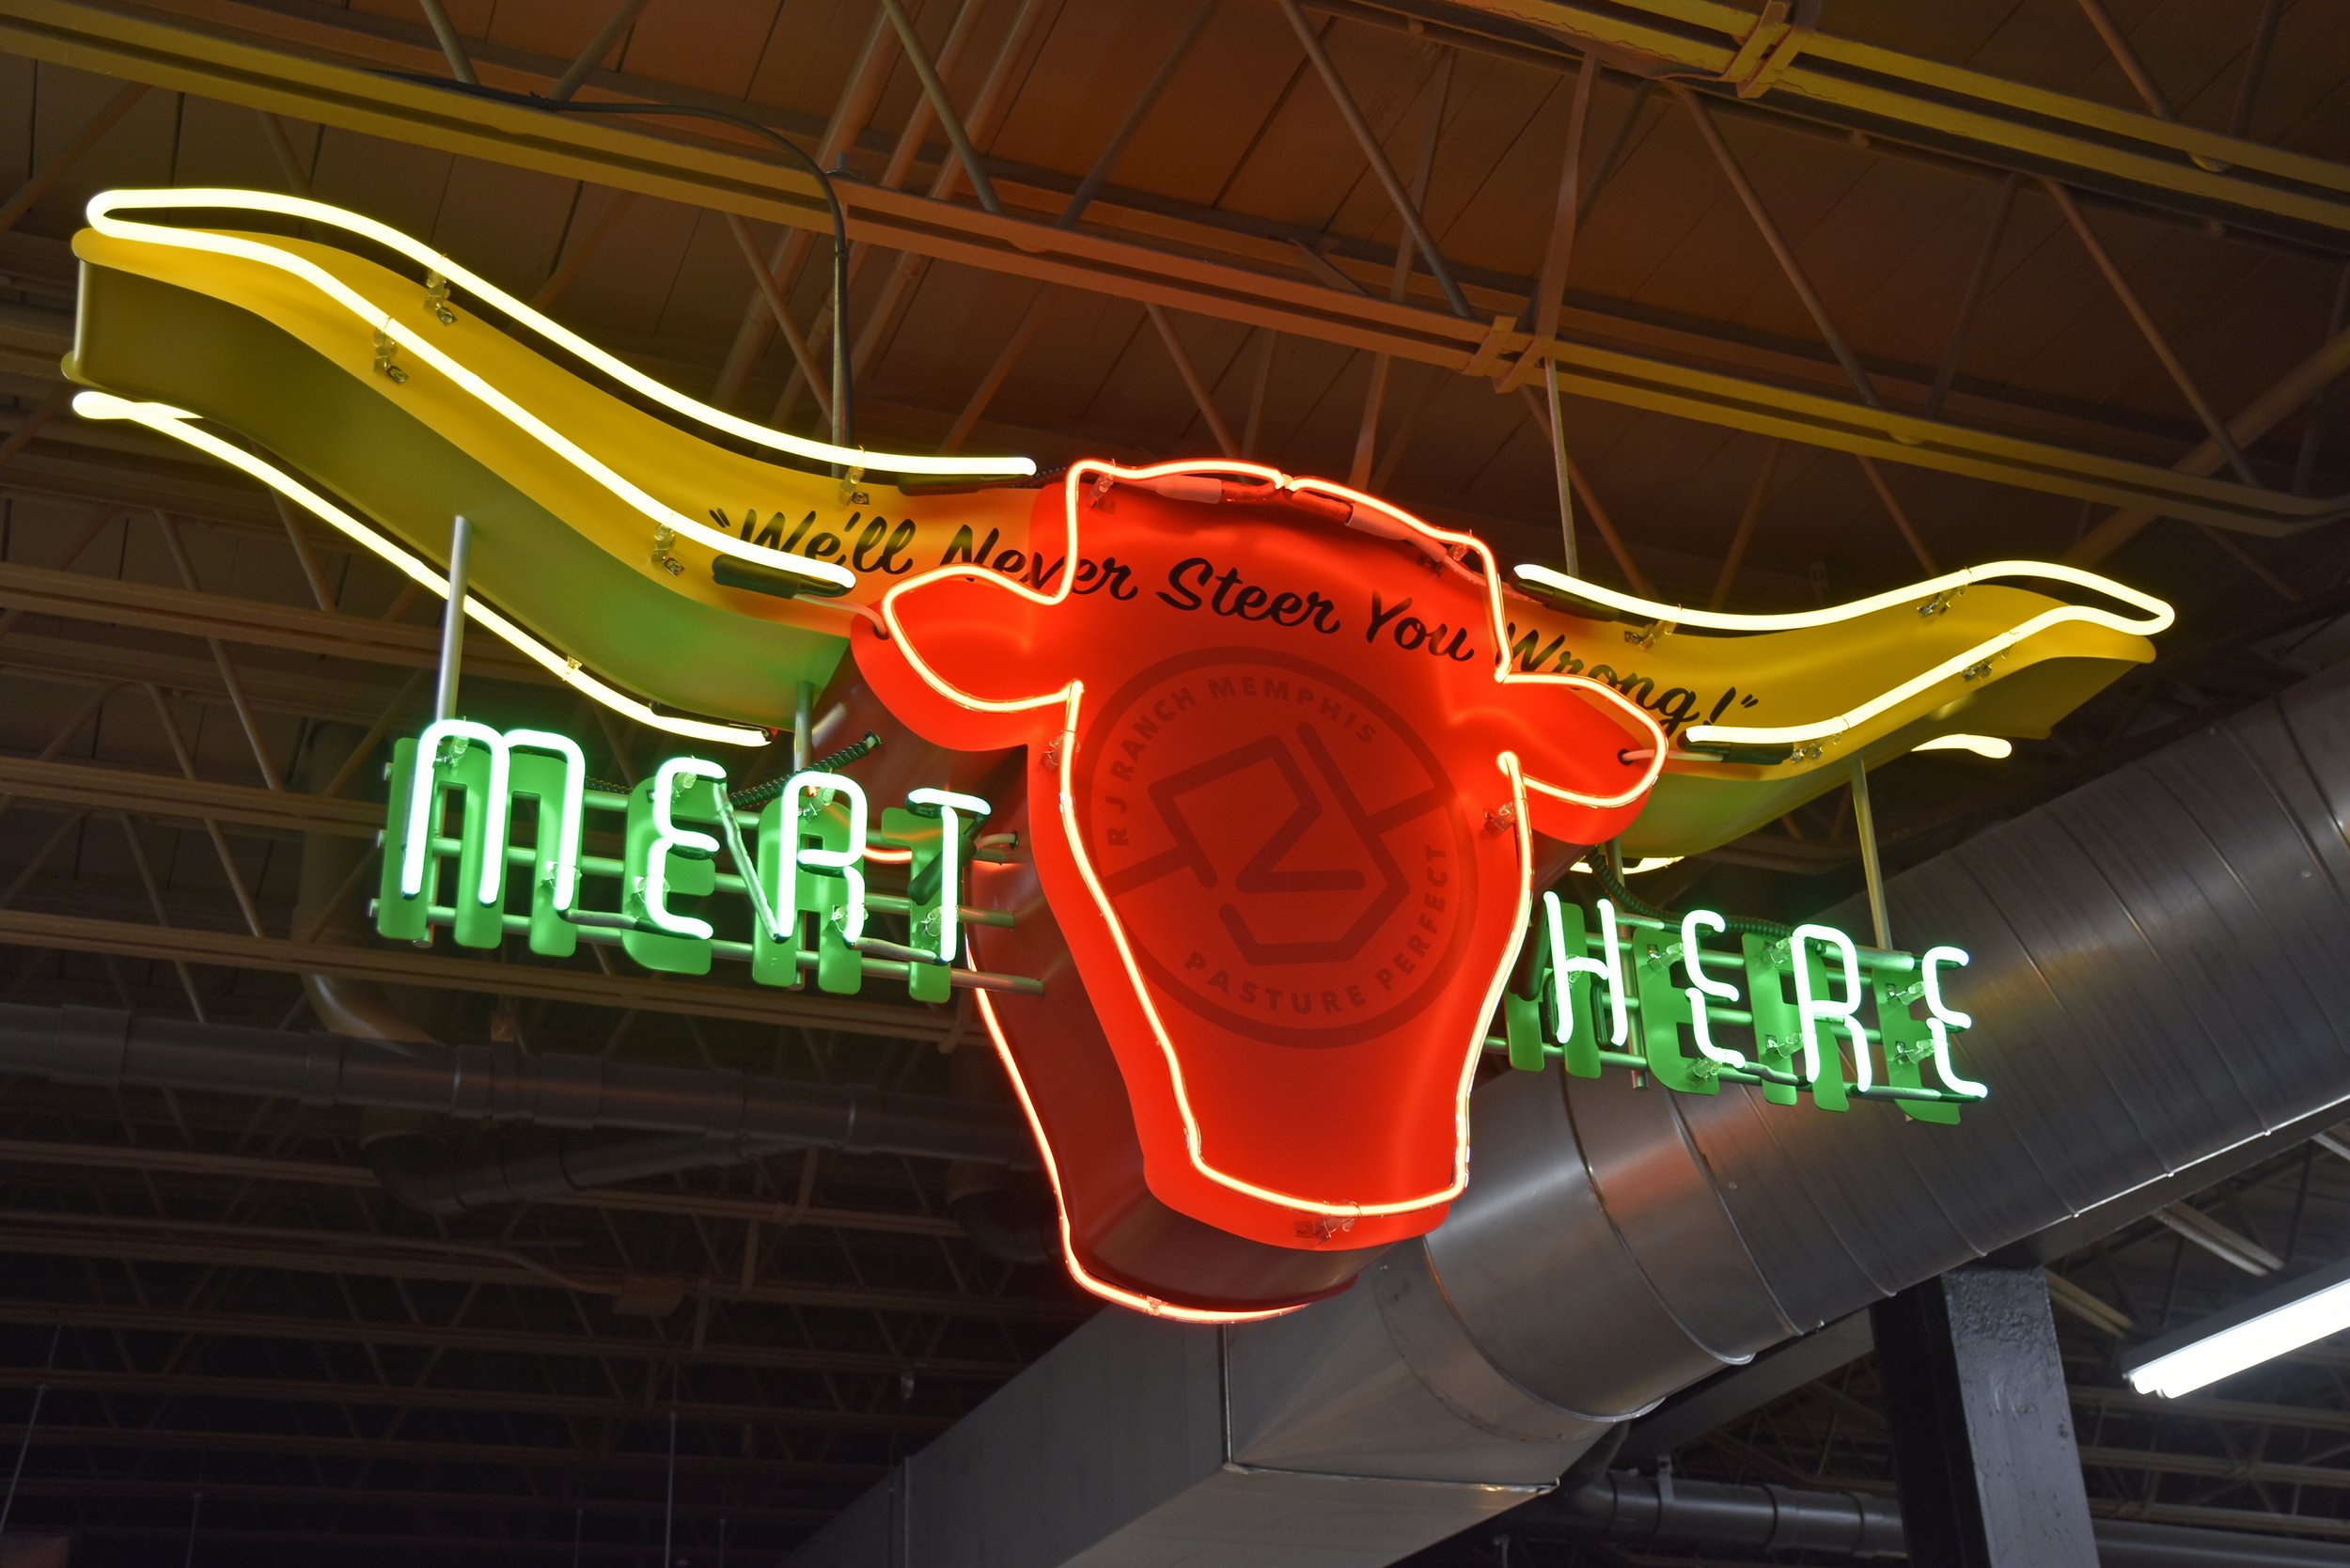  South Point Grocery  Downtown Memphis  “Meat Here Steer” meat department neon sign  Branding creative and design by Chuck Mitchell  Sign fabrication and installation by Frank Balton Sign Company 